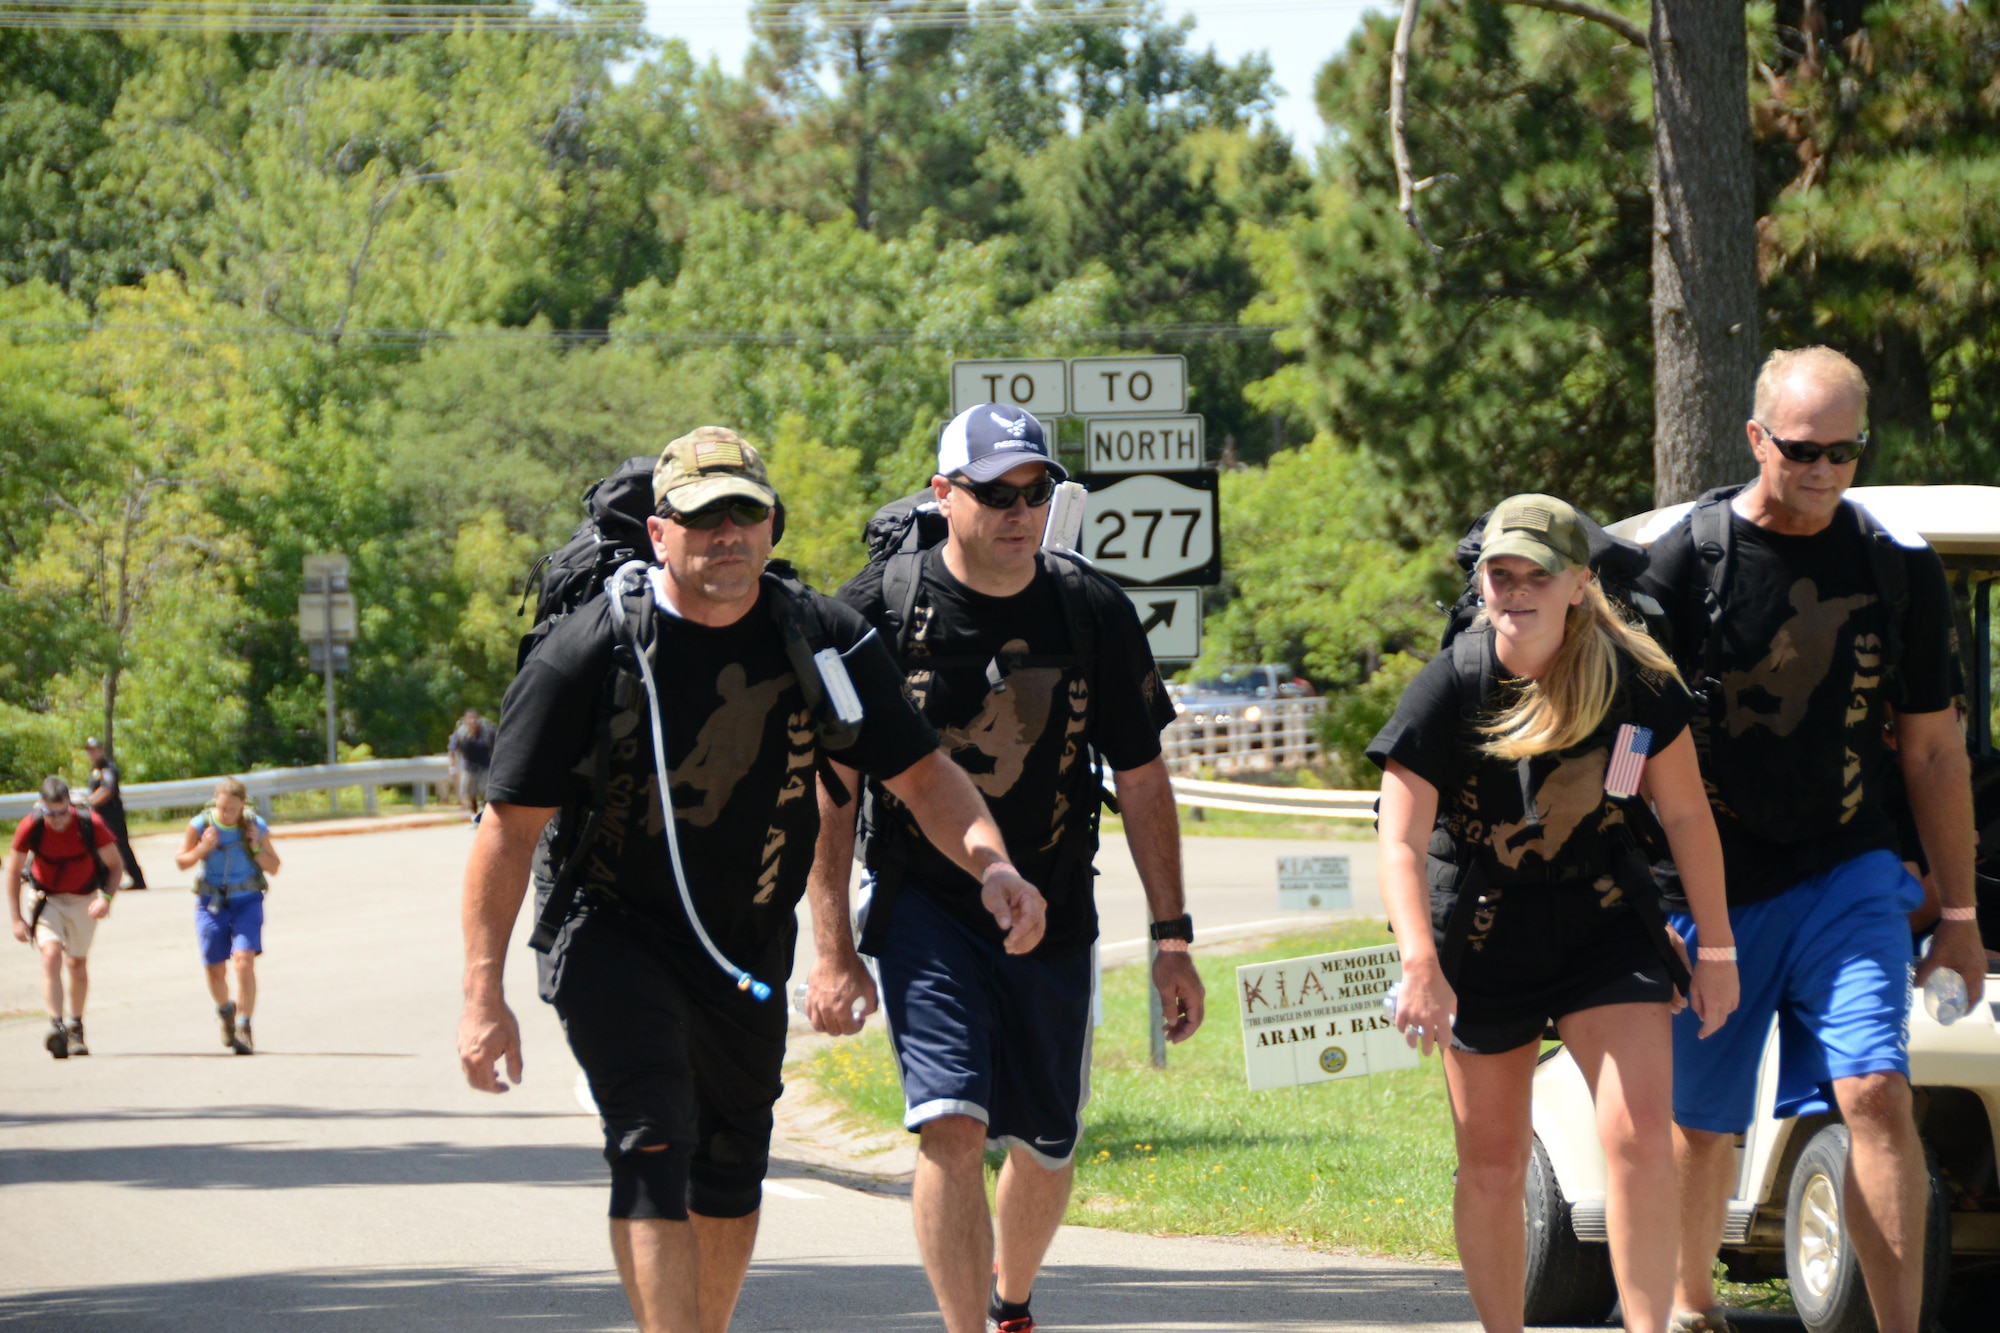 Senior Master Sgt. Steve Brown, Chief Master Sgt. Clint Ronan, Master Sgt. Hillary Harter and Col. Steven Parker participate in the KIA Memorial Road March at Chestnut Ridge State Park, Orchard Park, N.Y. August 22, 2015. Members of the 914th Airlift Wing participated in this 10K marching event carrying canned goods which were donated to local veteran organizations; all this in memory of Western New York veterans killed during the Global War on Terror. (U.S. Air Force photo by Tech. Sgt. Andrew Caya)